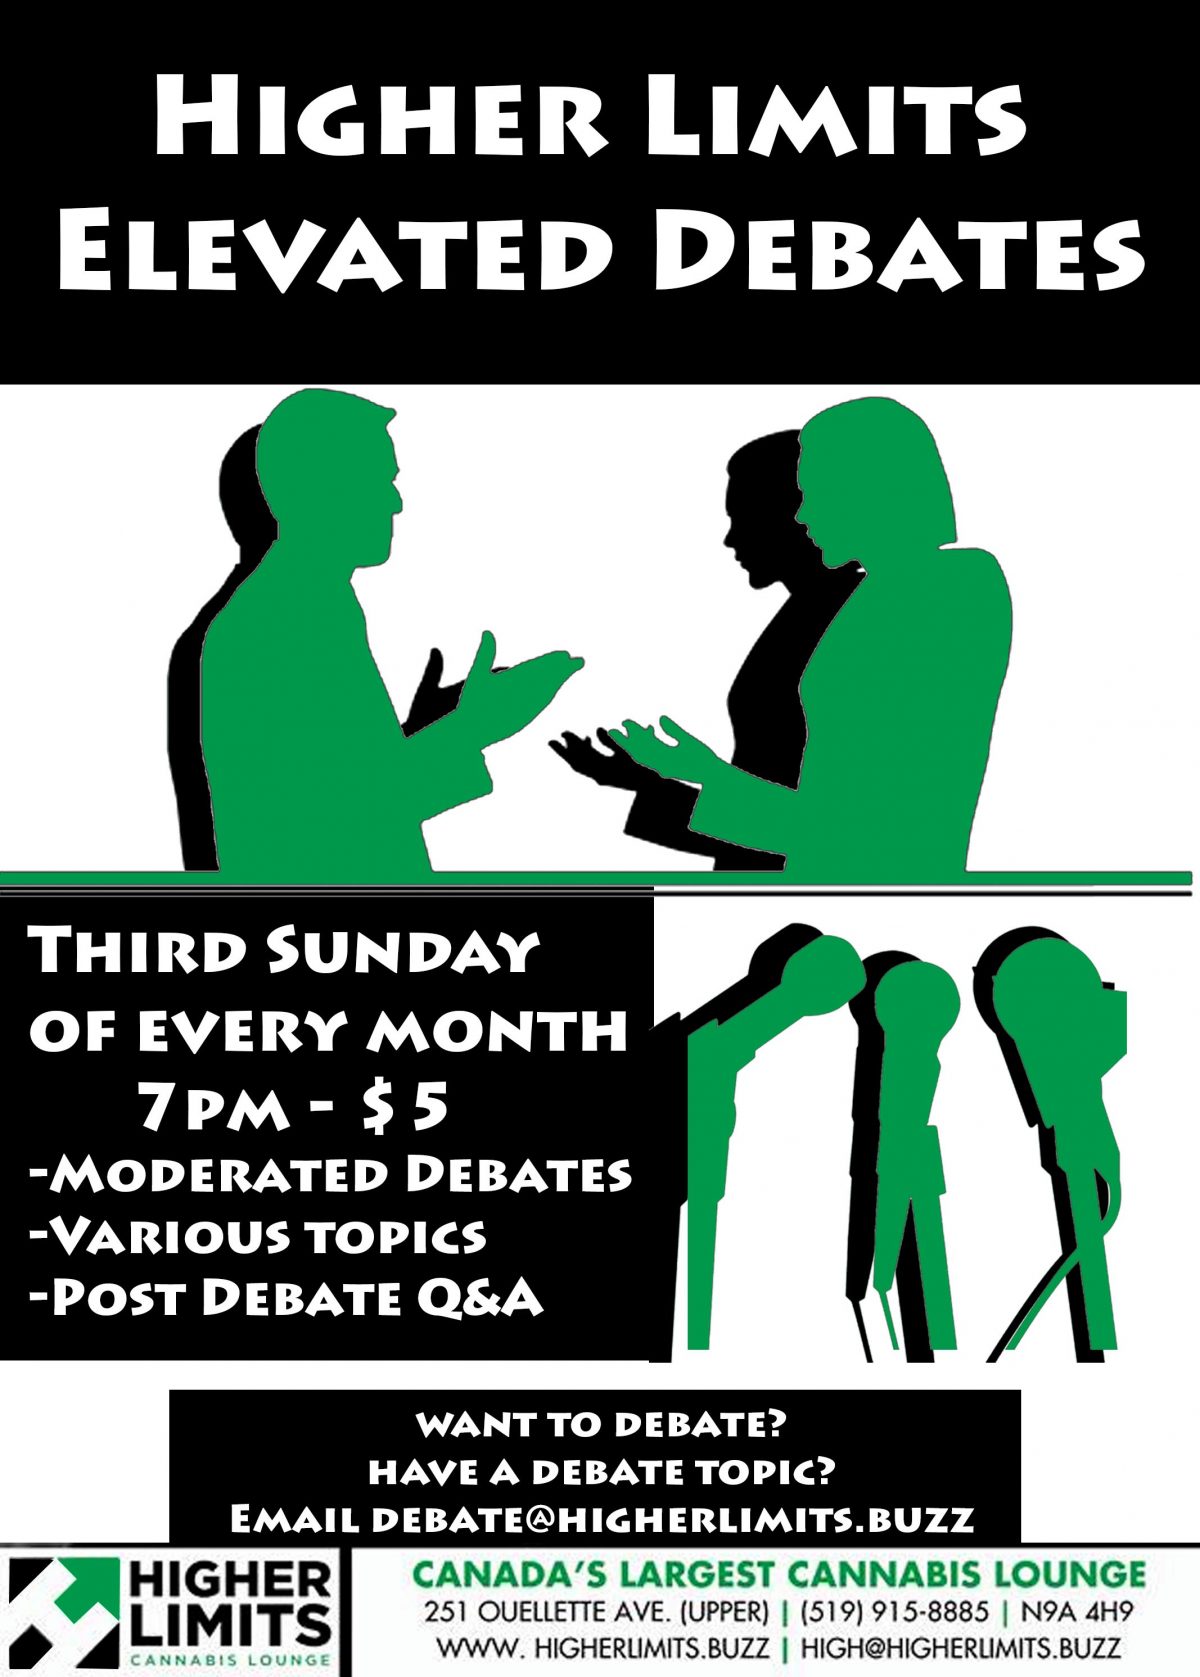 Higher Limits elevated debates March 2017